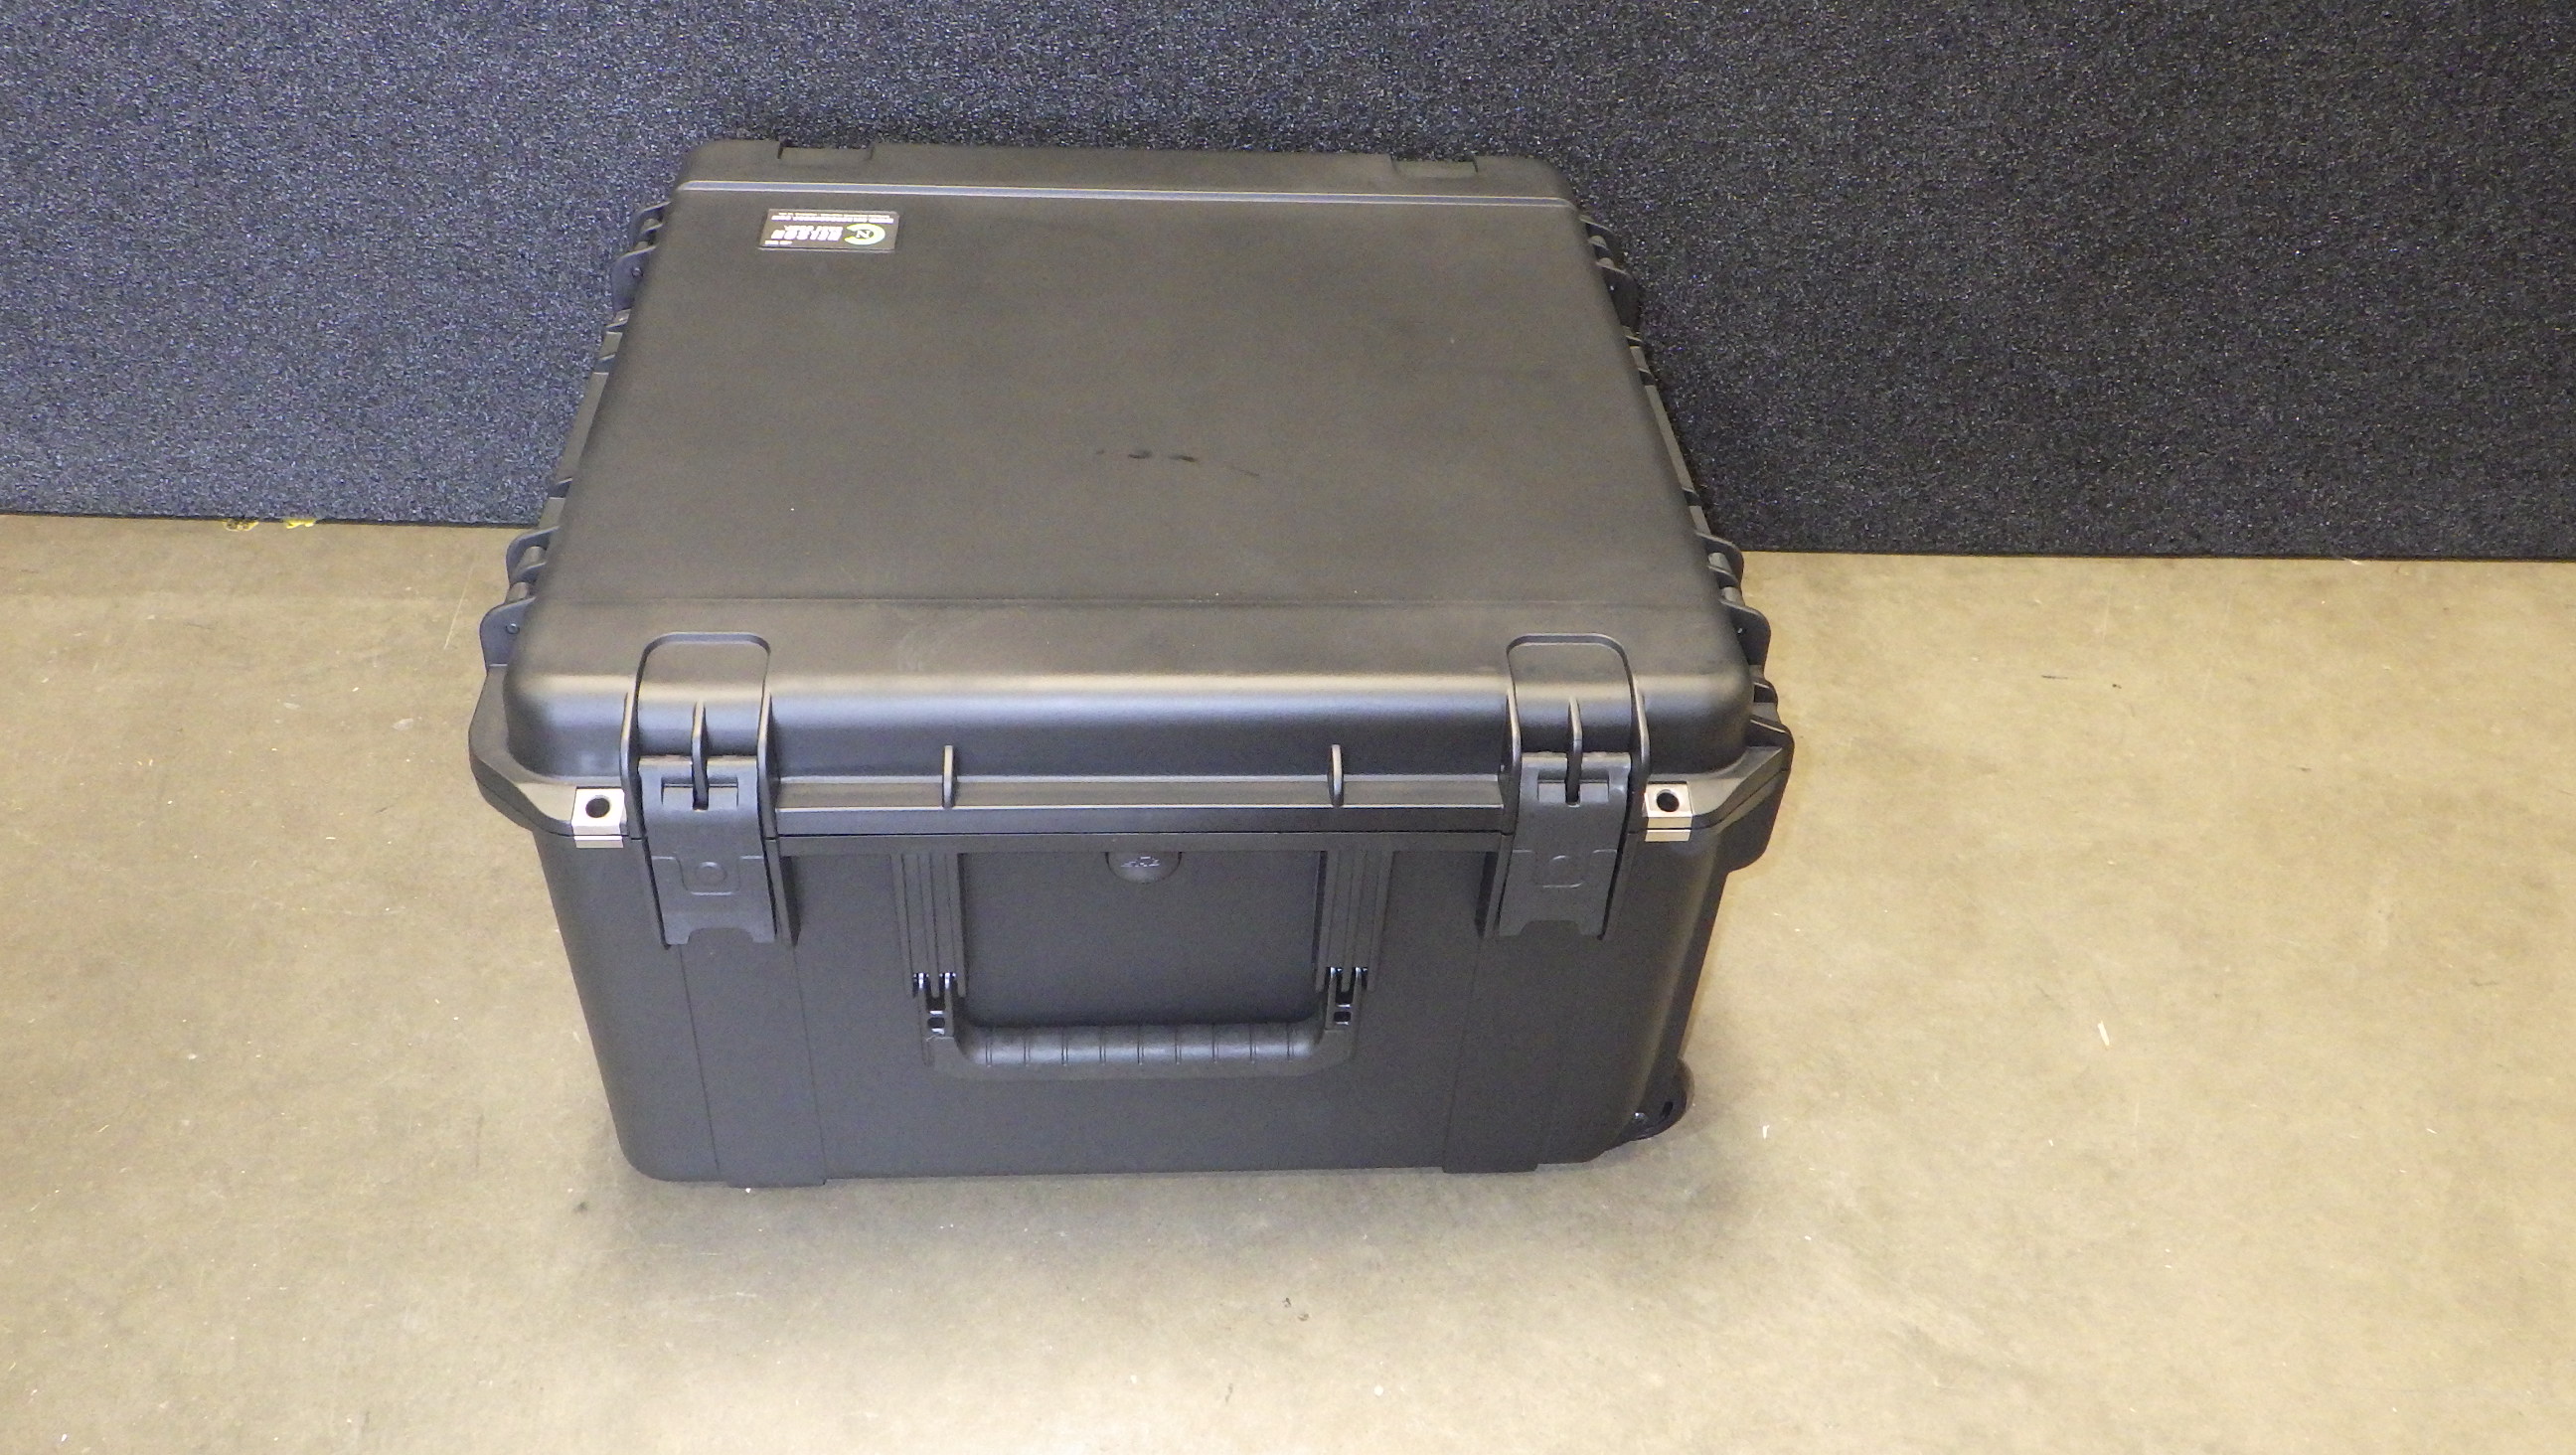 Print # 9507 - SKB 3i-2222-12 Retrofitted for Panasonic PT-CMZ50BU Projector with Accessories Compartment By Nelson Case Corp